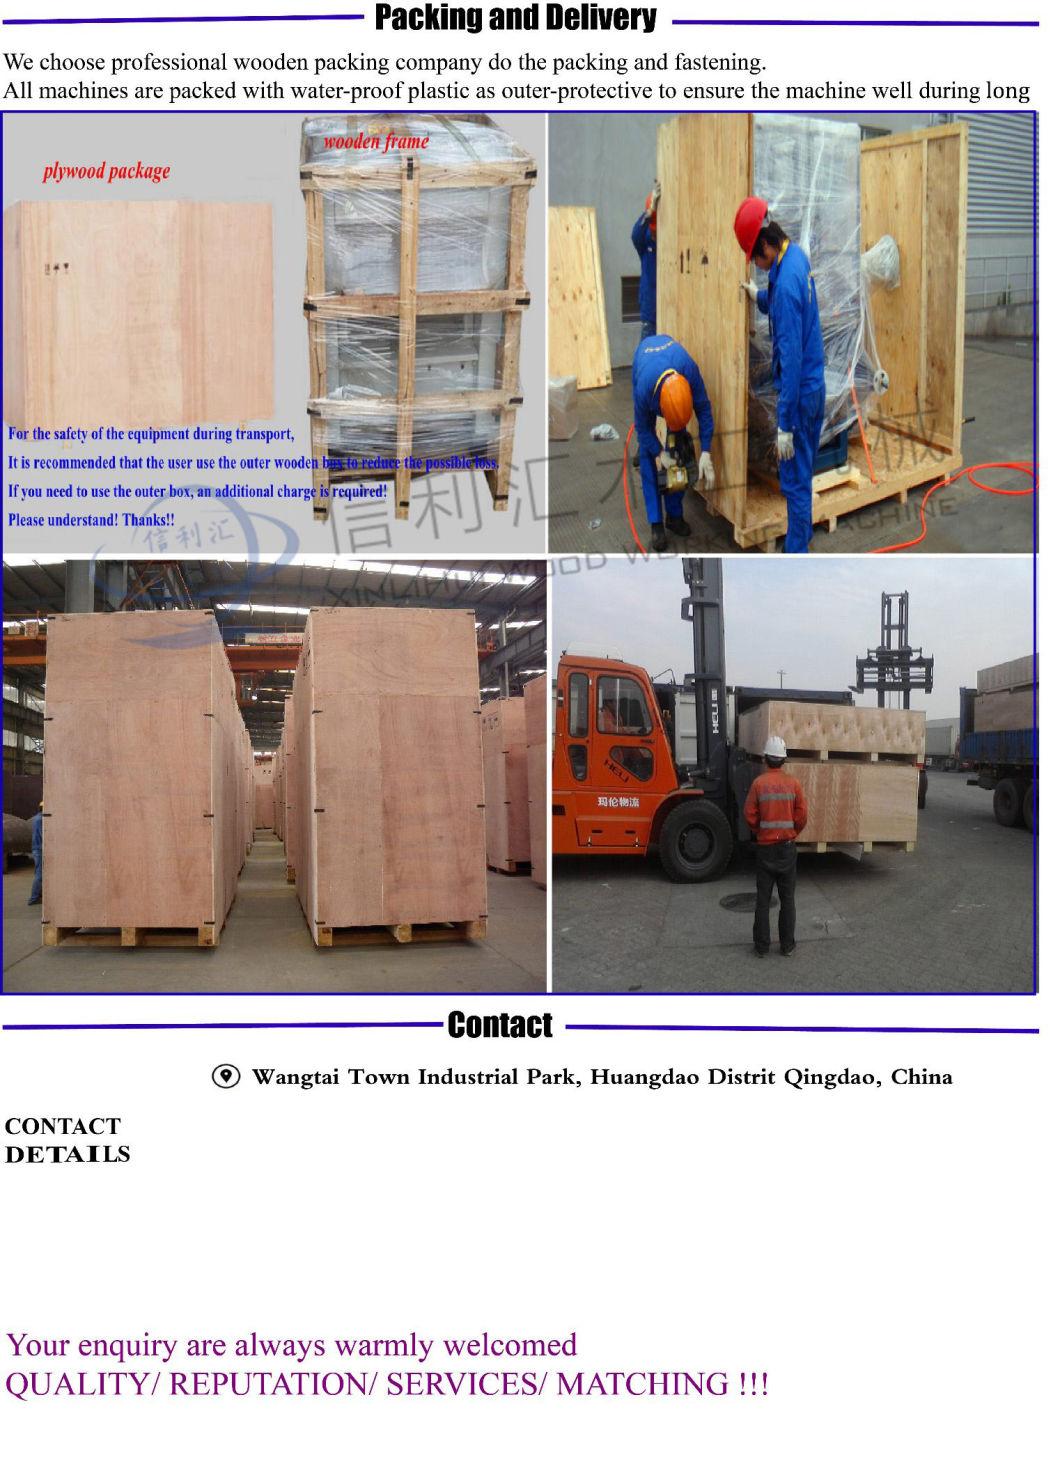 Low Cost 2800/ 3000/ 3200/ 3800 mm Sliding Table Panel Saw Wood Working Machine for Laminate Board/ Wood Sheet/ Plywood Plate